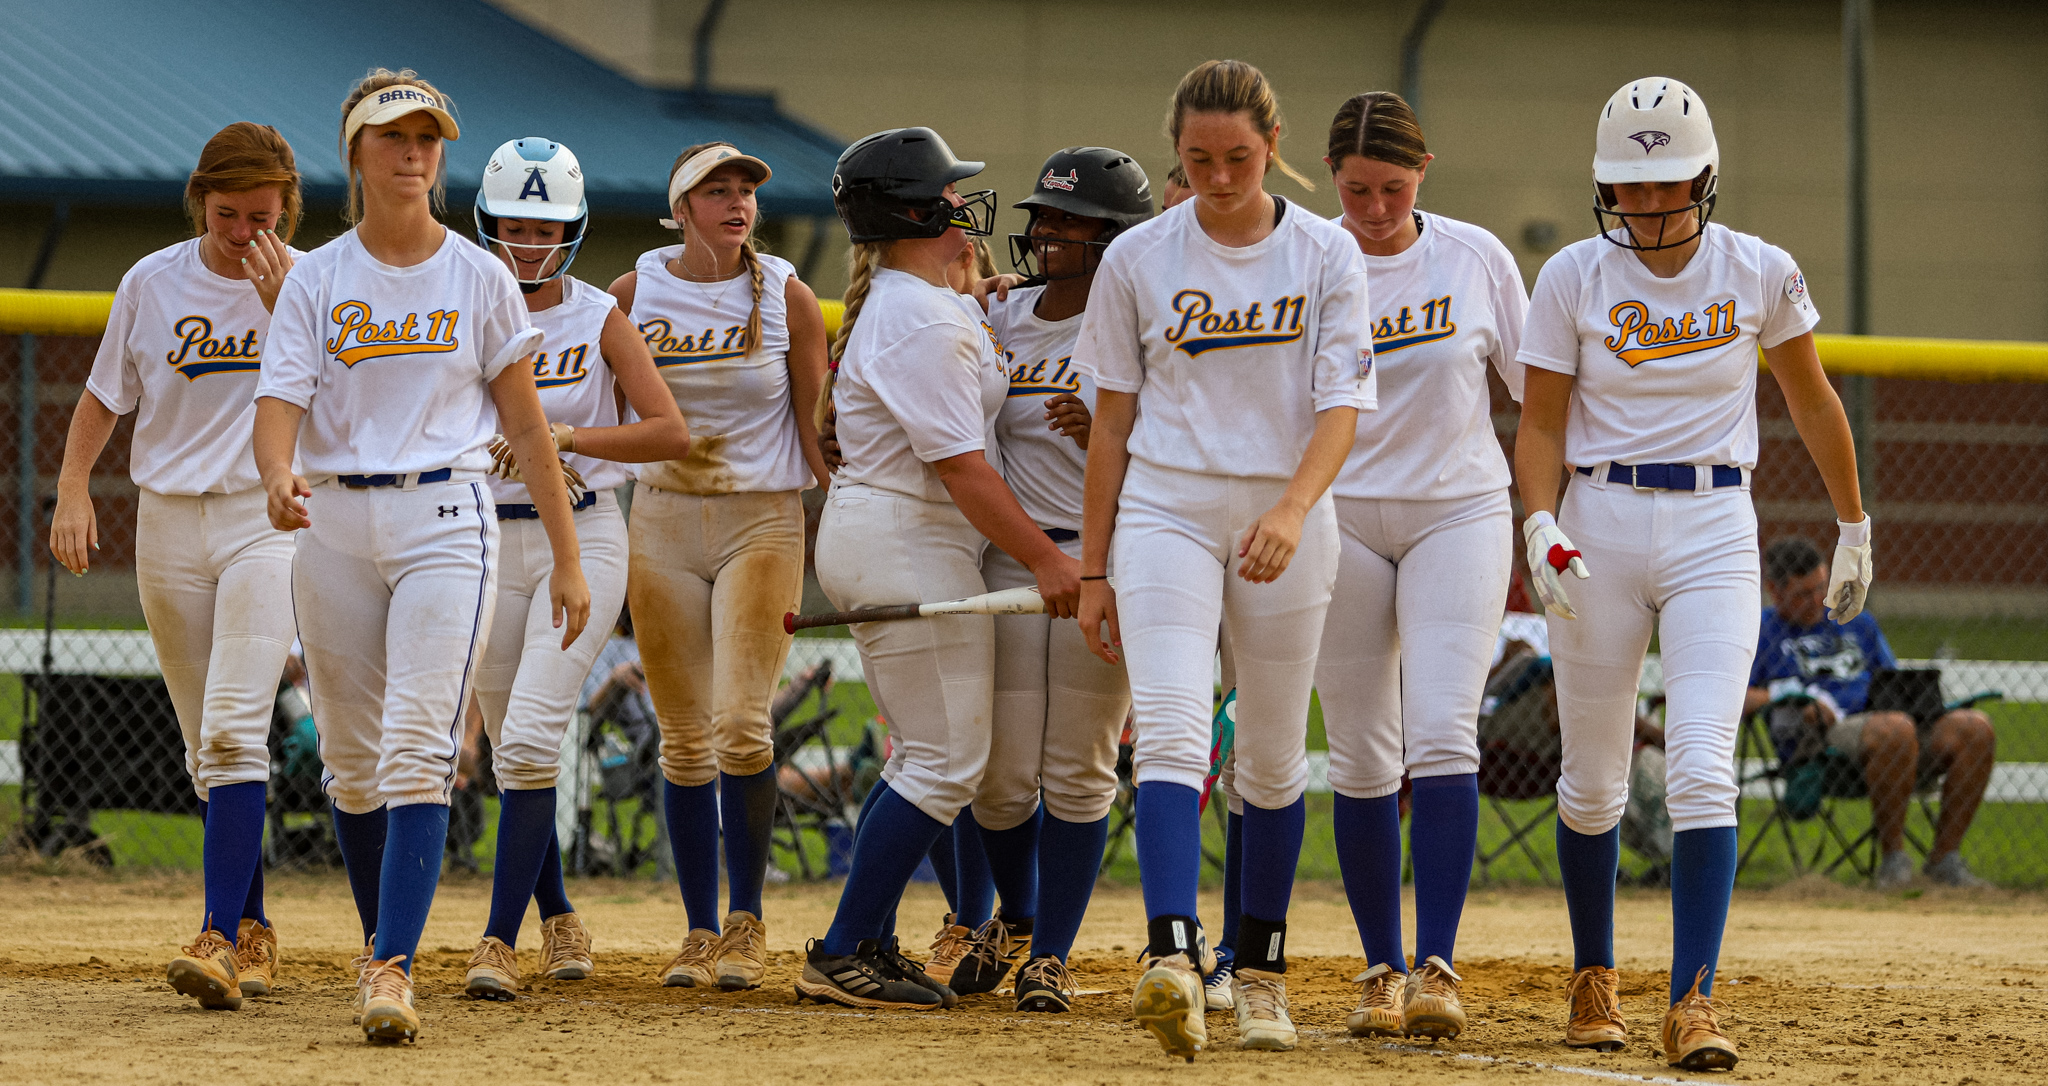 Softball: Wayne County One Win Away From First State Tournament Berth (PHOTO GALLERY)